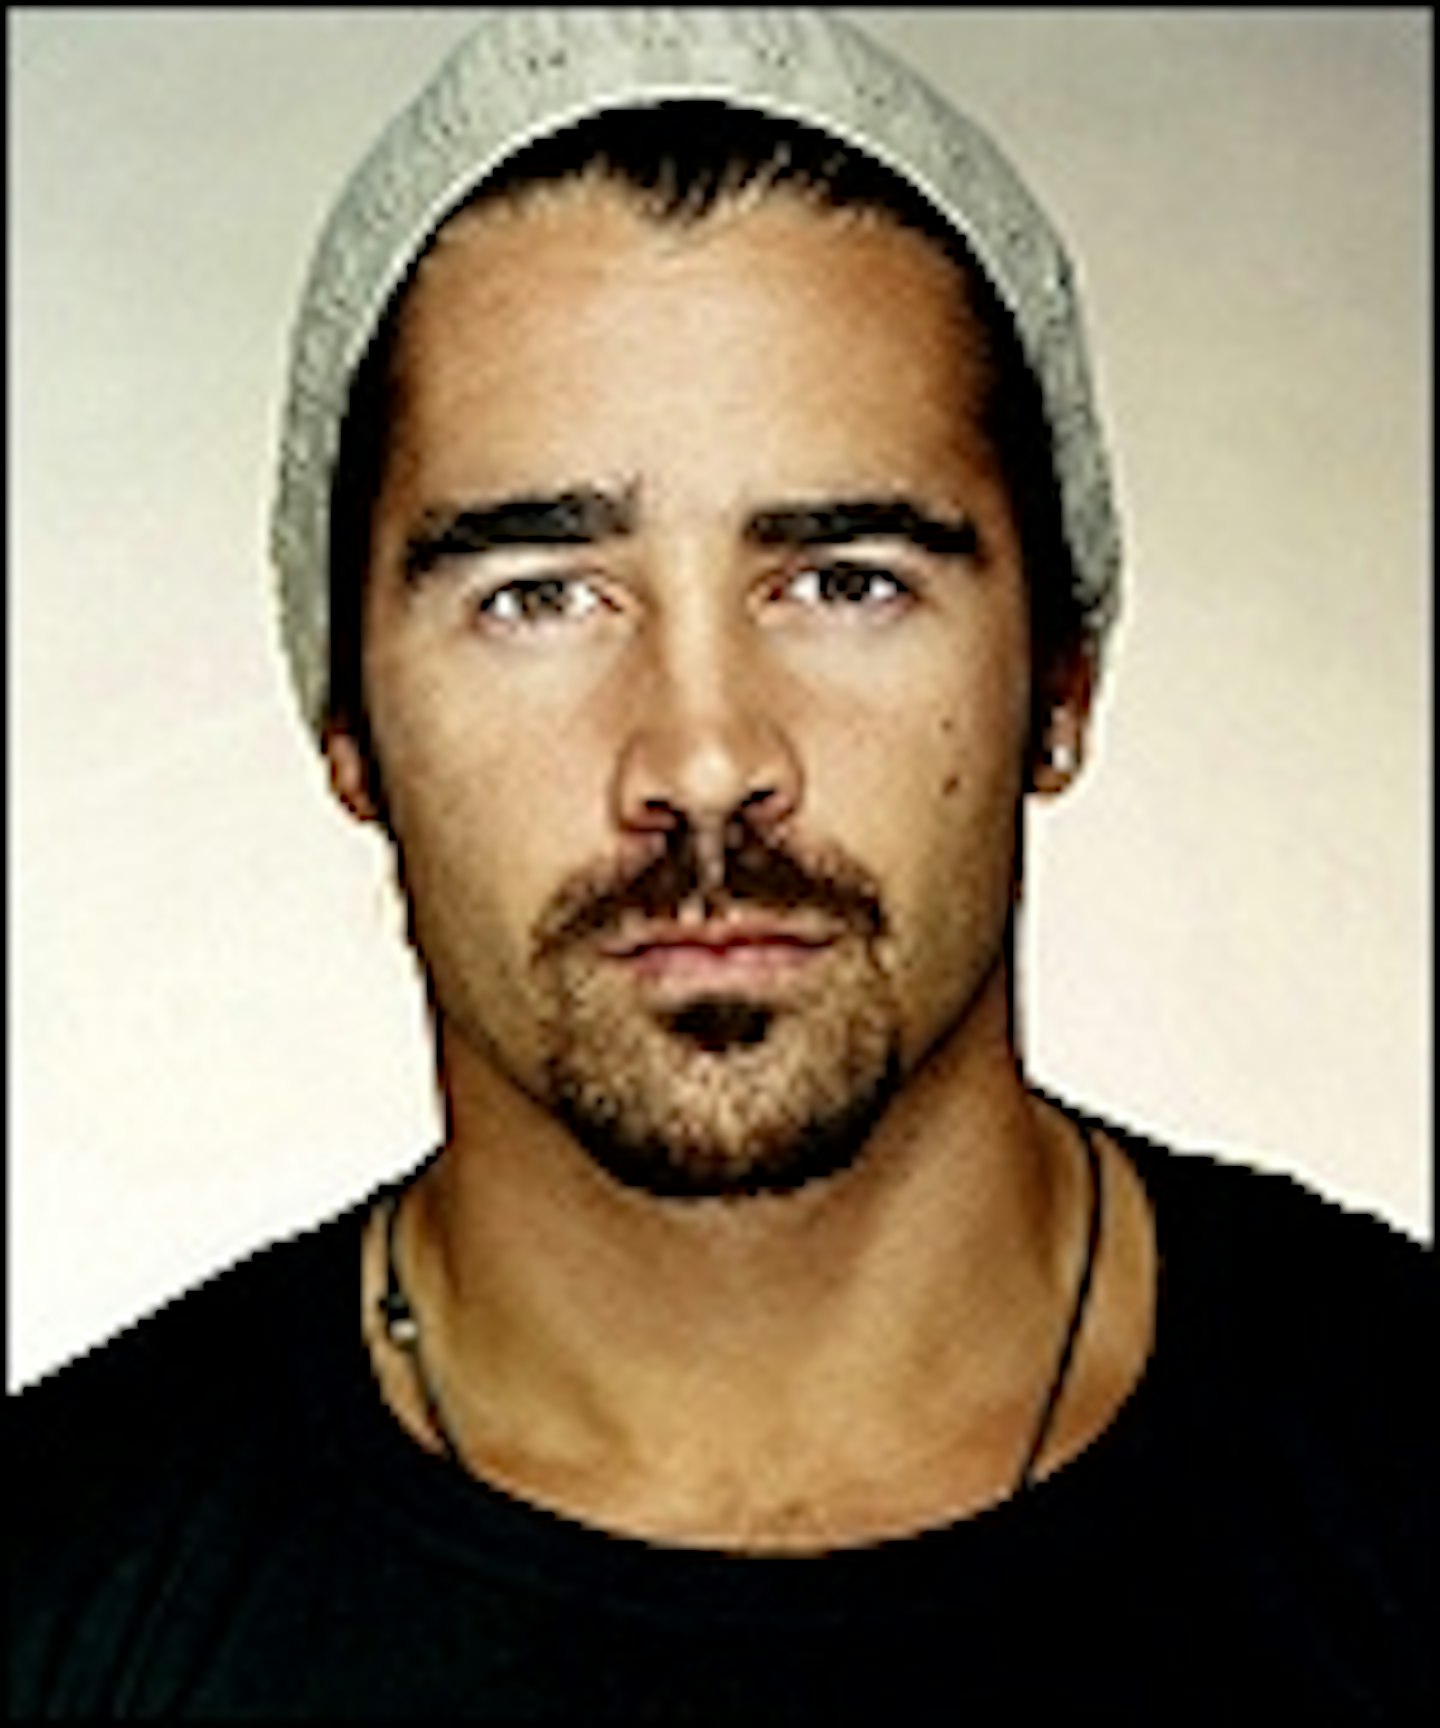 Will Colin Farrell Have Total Recall?